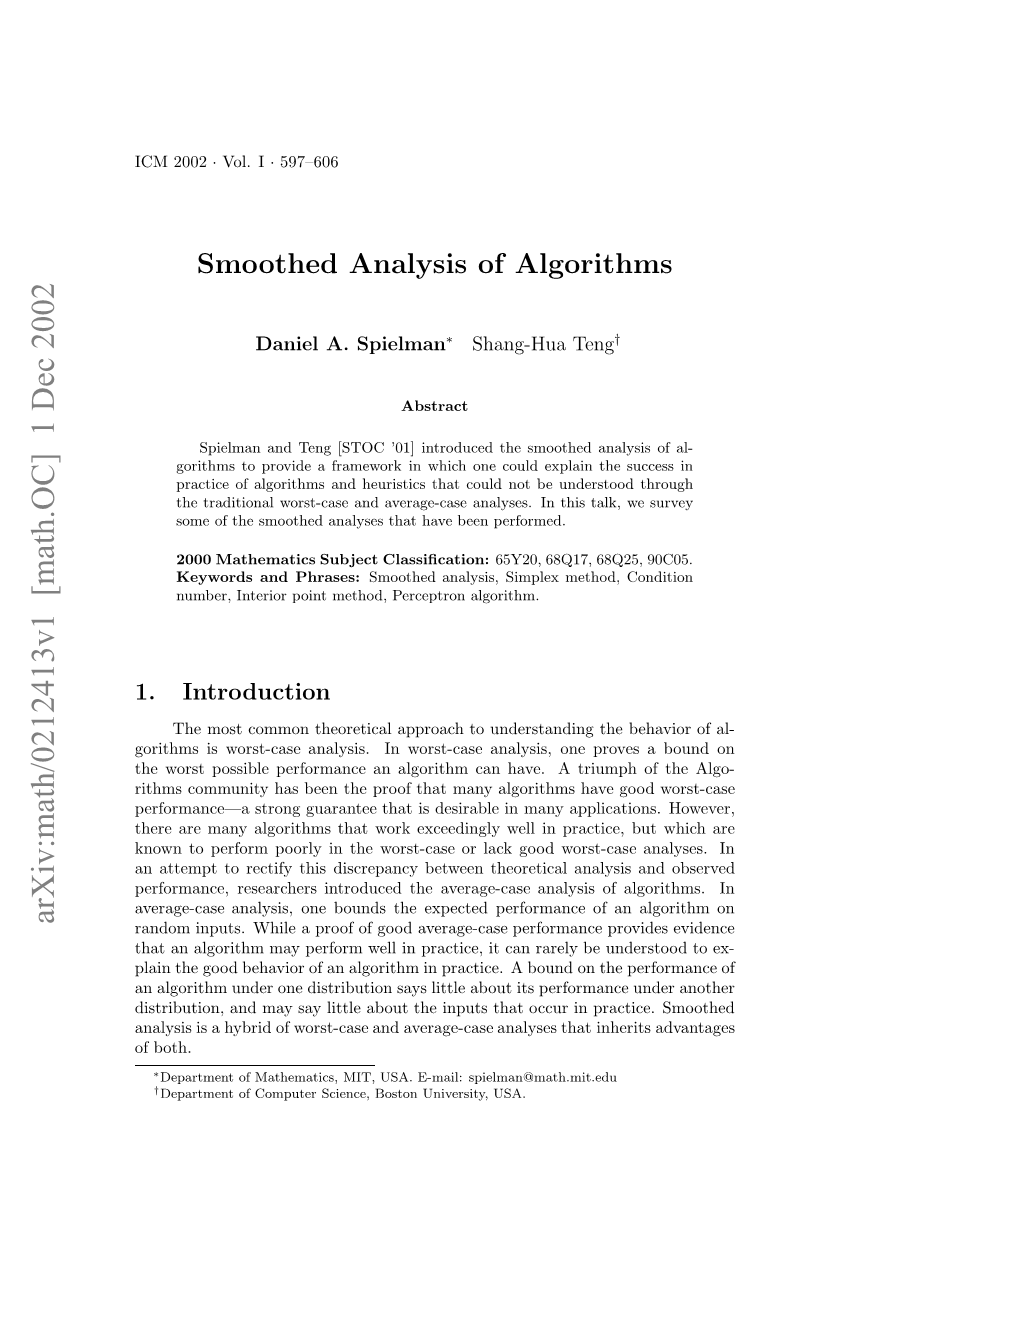 Smoothed Analysis of Algorithms, We Measure the Expected Performance of Algorithms Under Slight Random Perturbations of Worst-Case Inputs